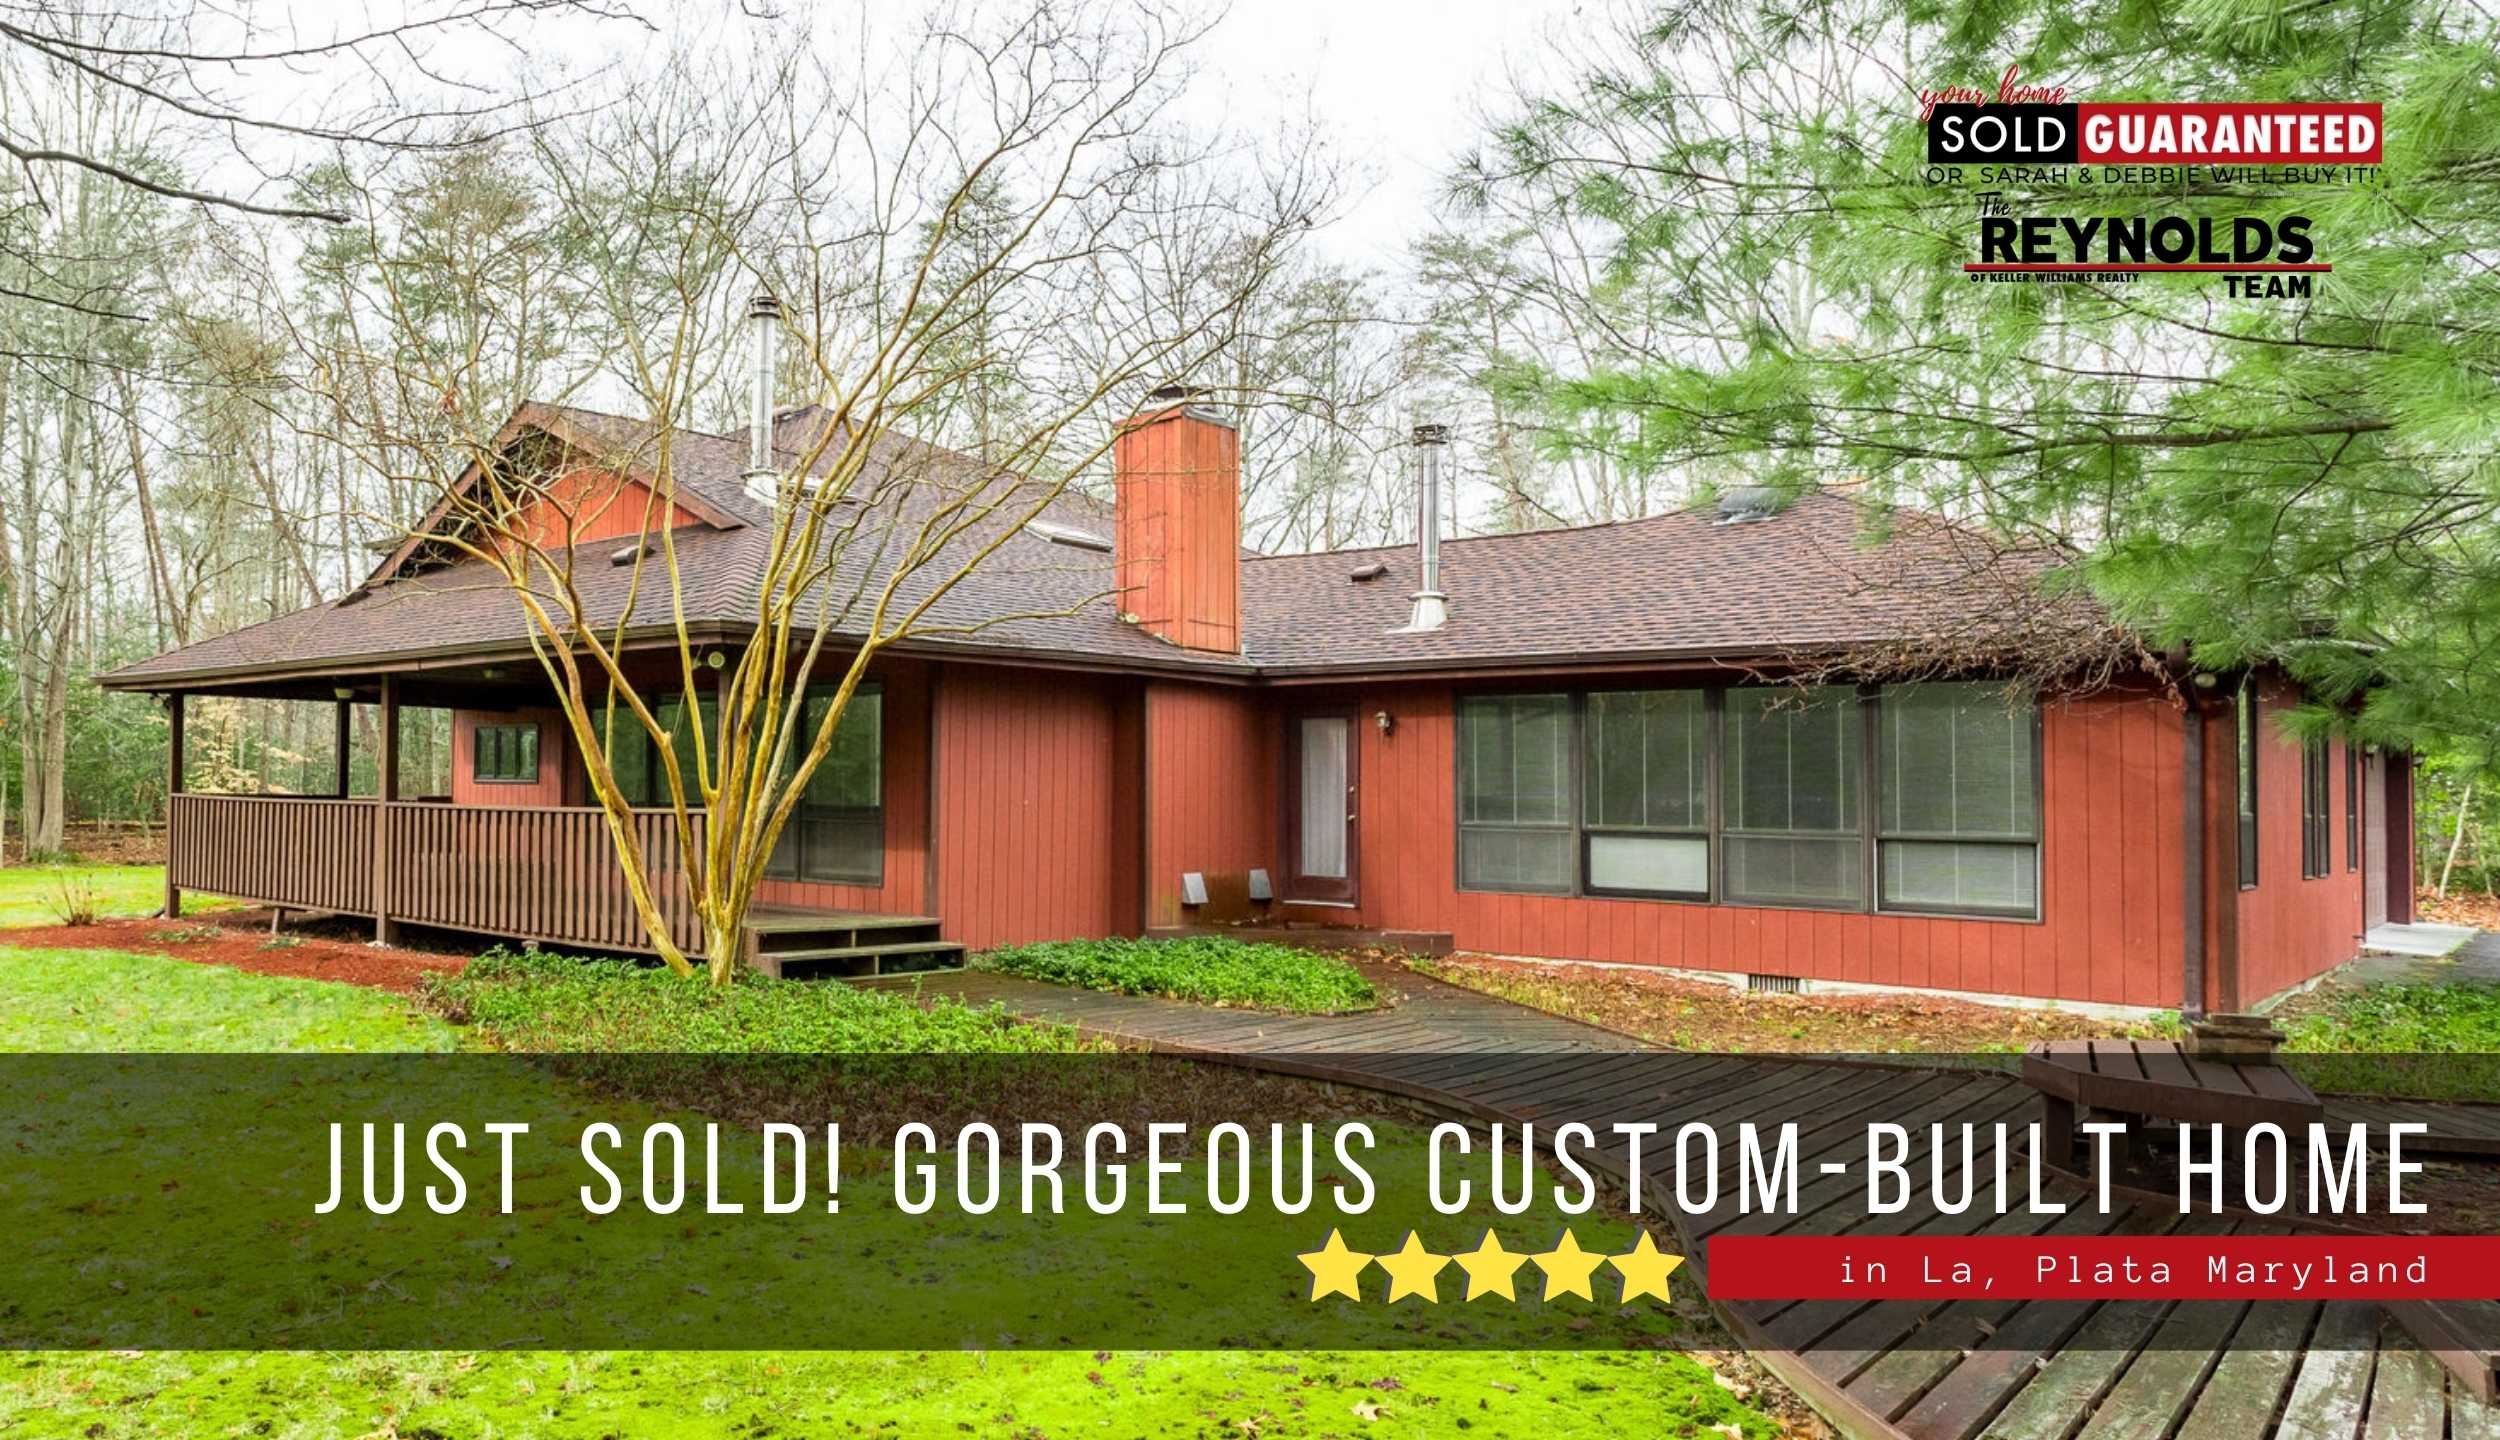 JUST SOLD! Gorgeous Custom-Built Home in La, Plata Maryland